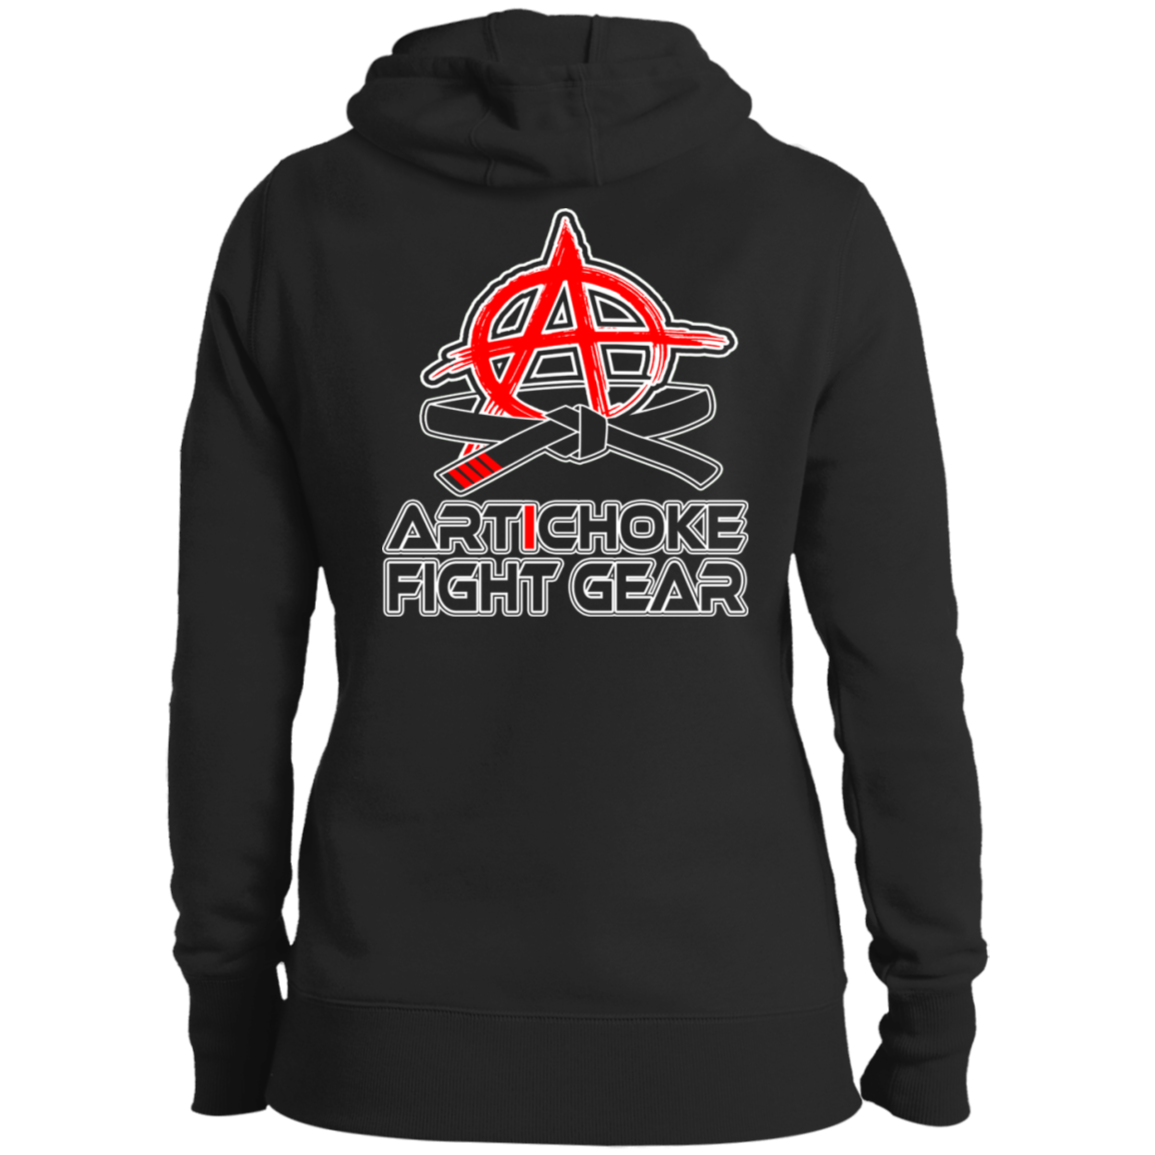 Artichoke Fight Gear Custom Design #16. Sticks And Stones May Break My Bones But Words Can Get You Choked Out. Gracie Fighter. BJJ. Ladies' Ultra Soft Hoodie